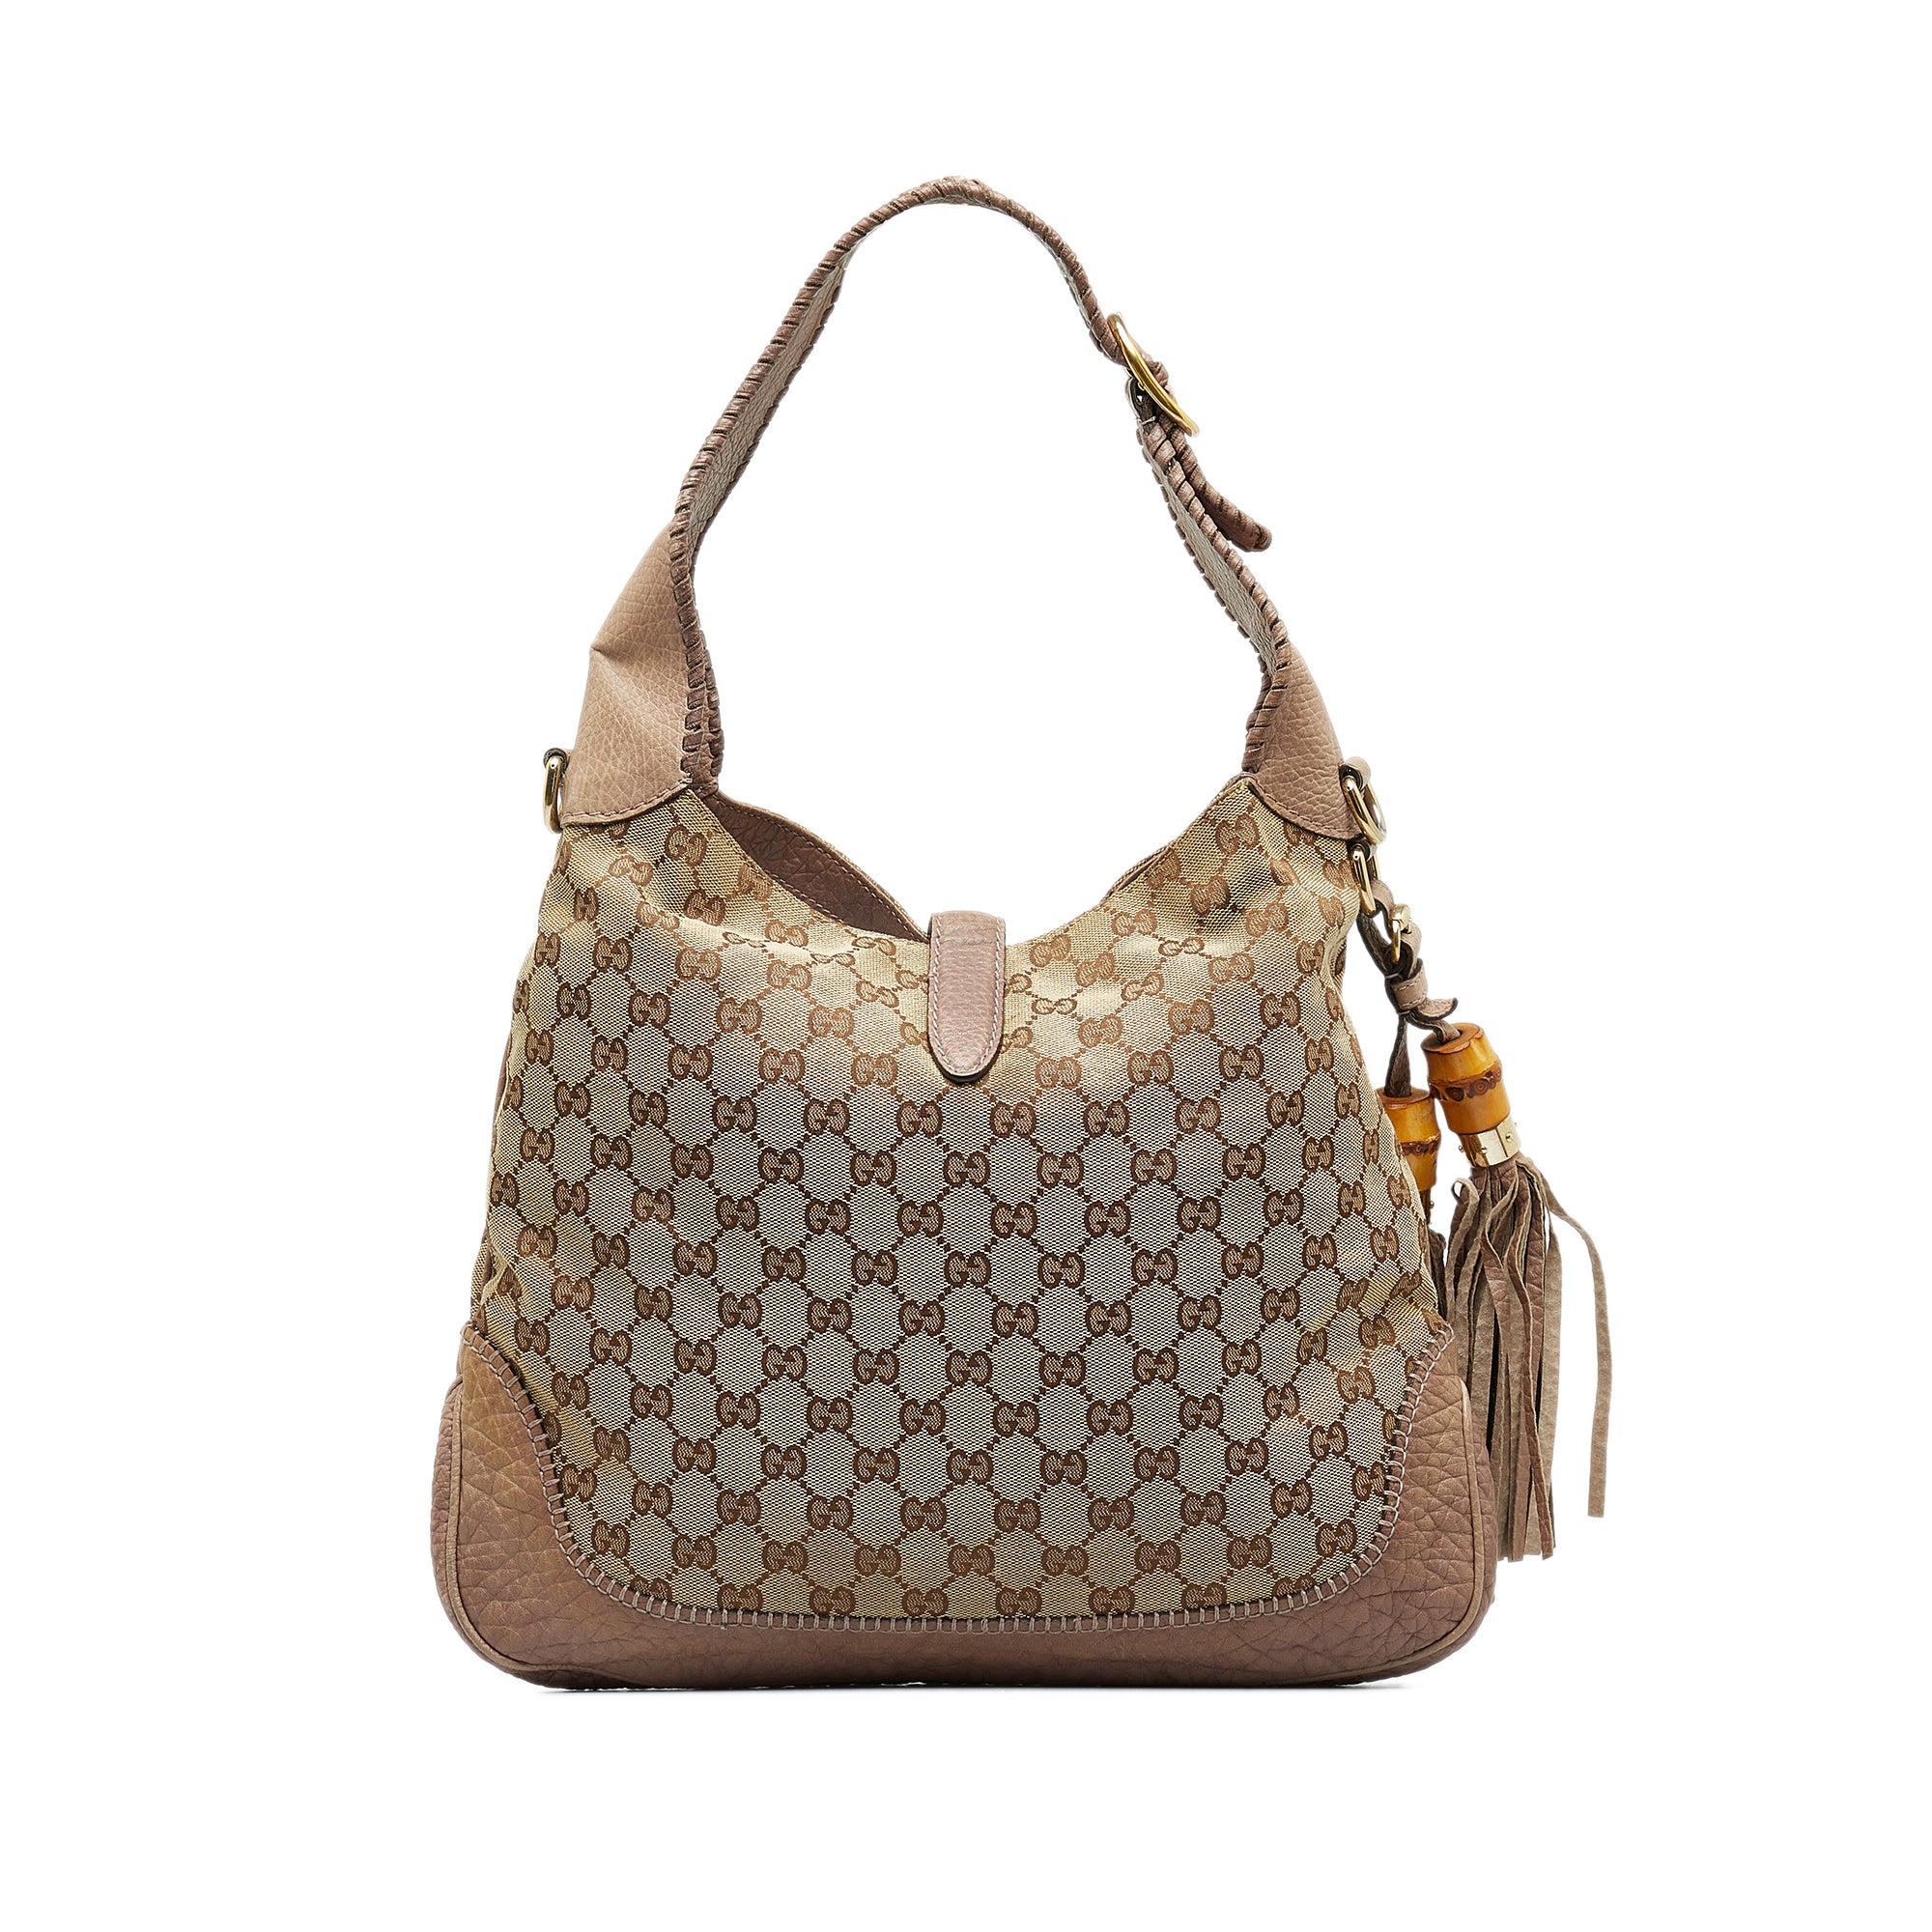 Gucci - Authenticated Jackie Vintage Handbag - Cloth Brown for Women, Very Good Condition